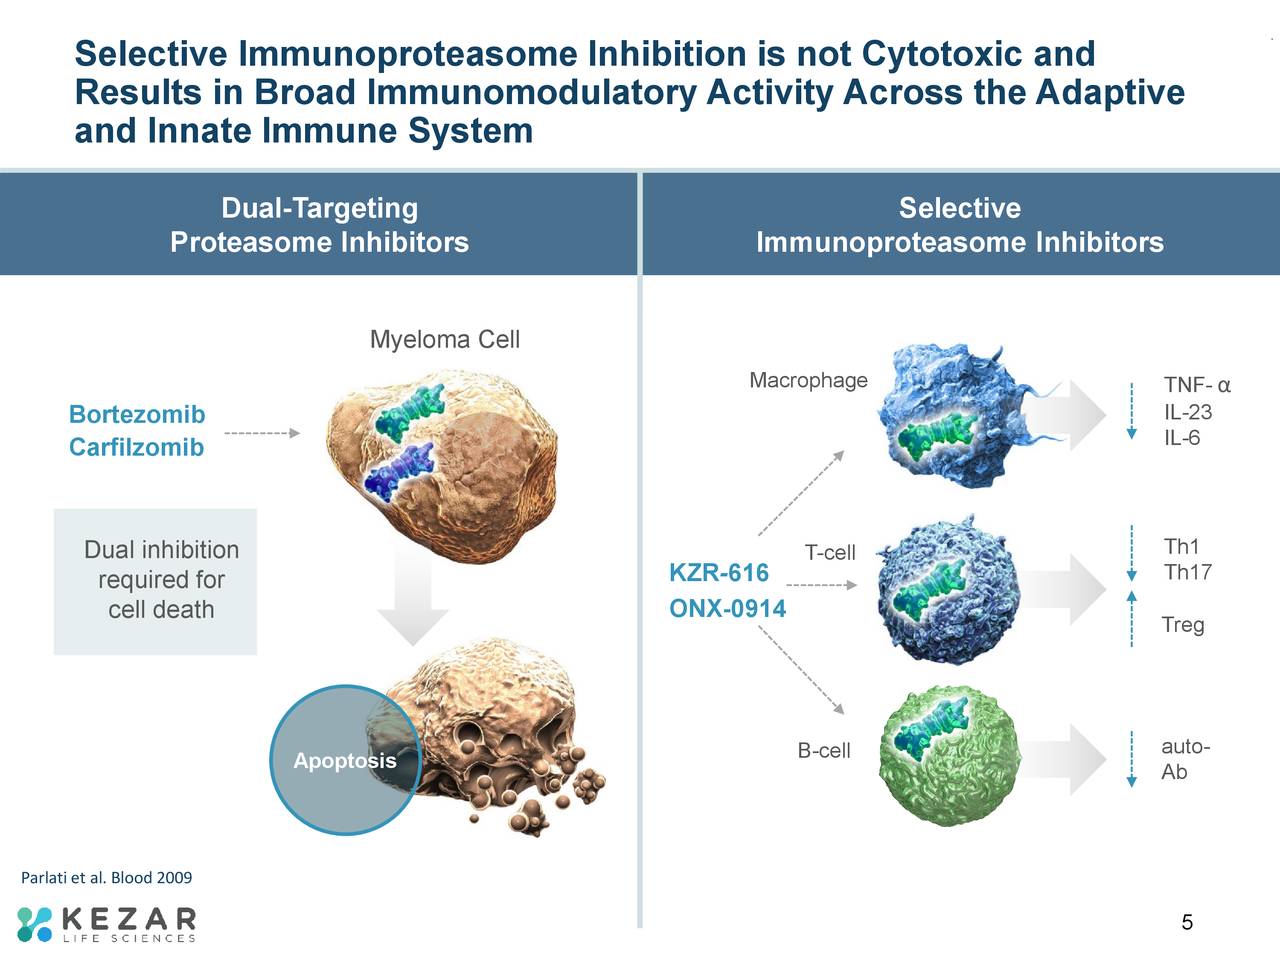 Selective Immunoproteasome Inhibition is not Cytotoxic and